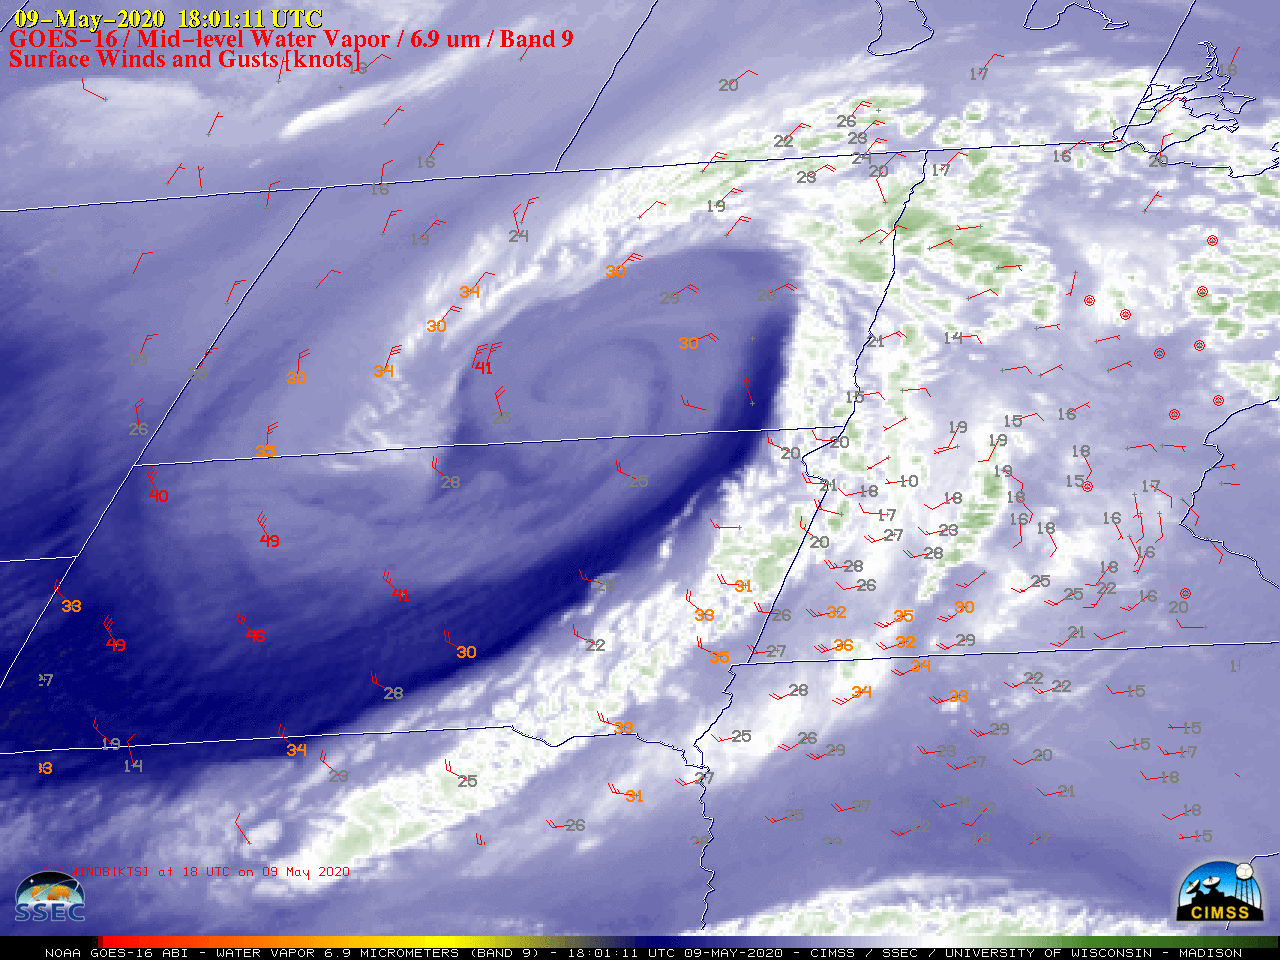 GOES-16 Mid-level Water Vapor (6.9 µm) images, with plots of hourly wind barbs and gusts [click to pay animation | MP4]